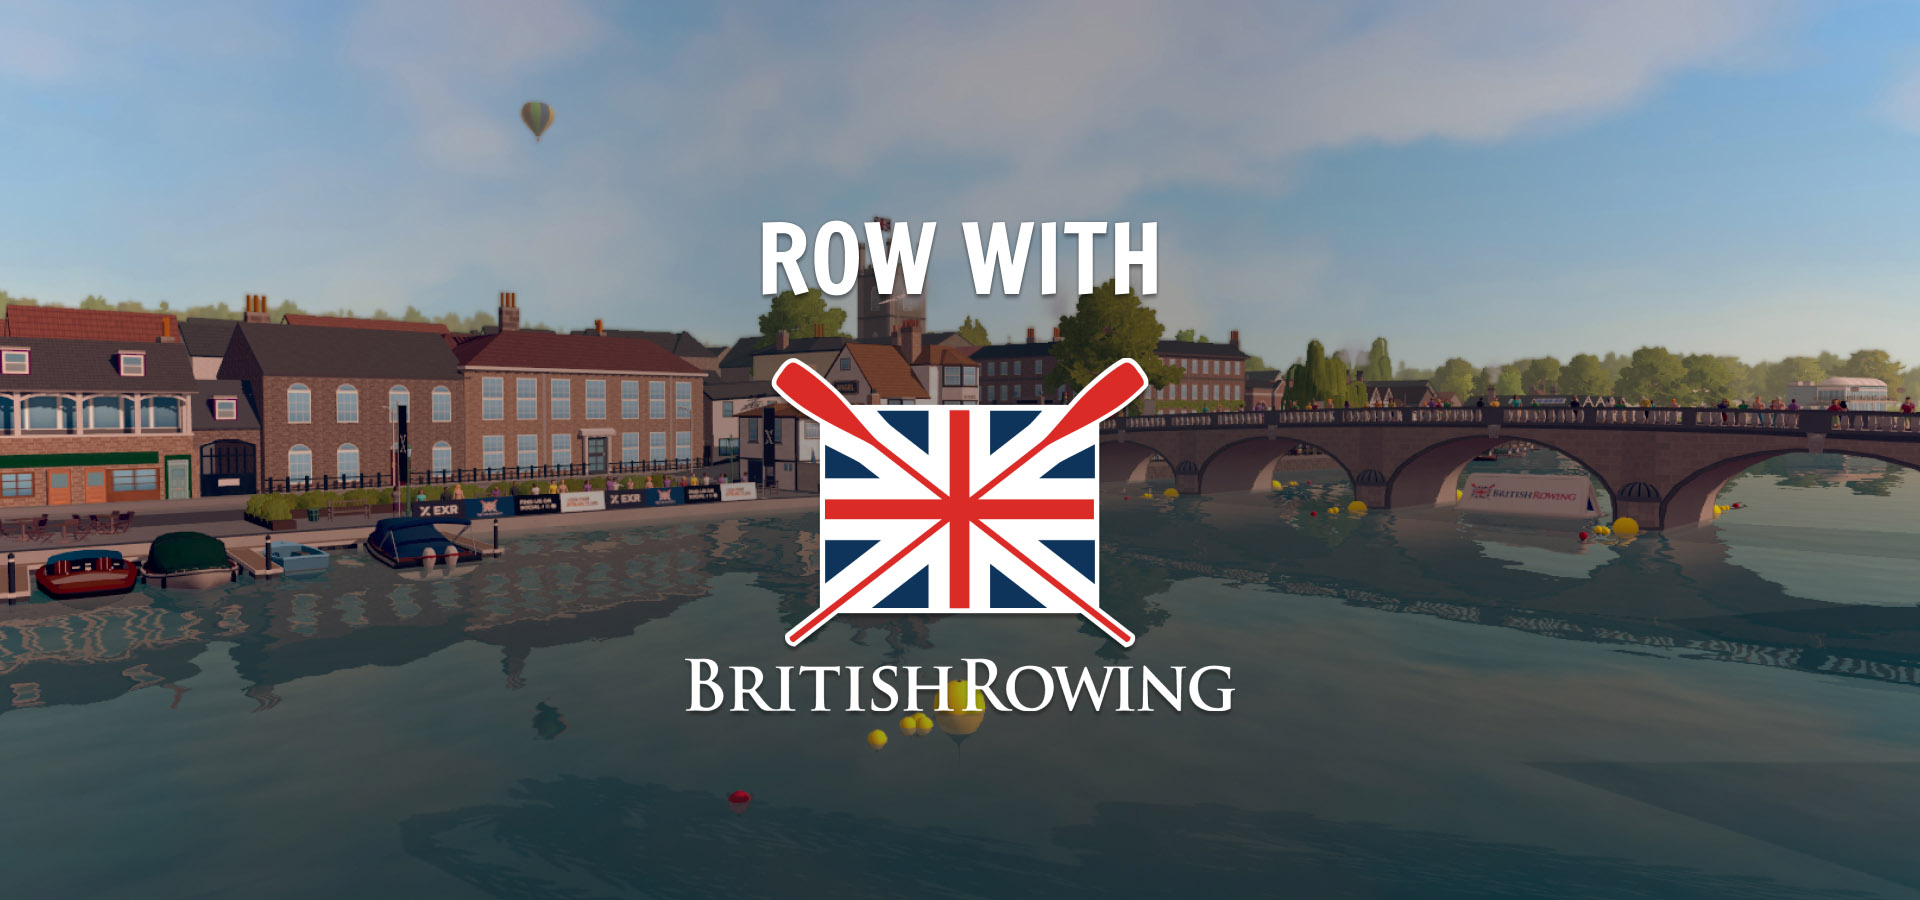 Image of the henley river with the British Rowing logo overtop